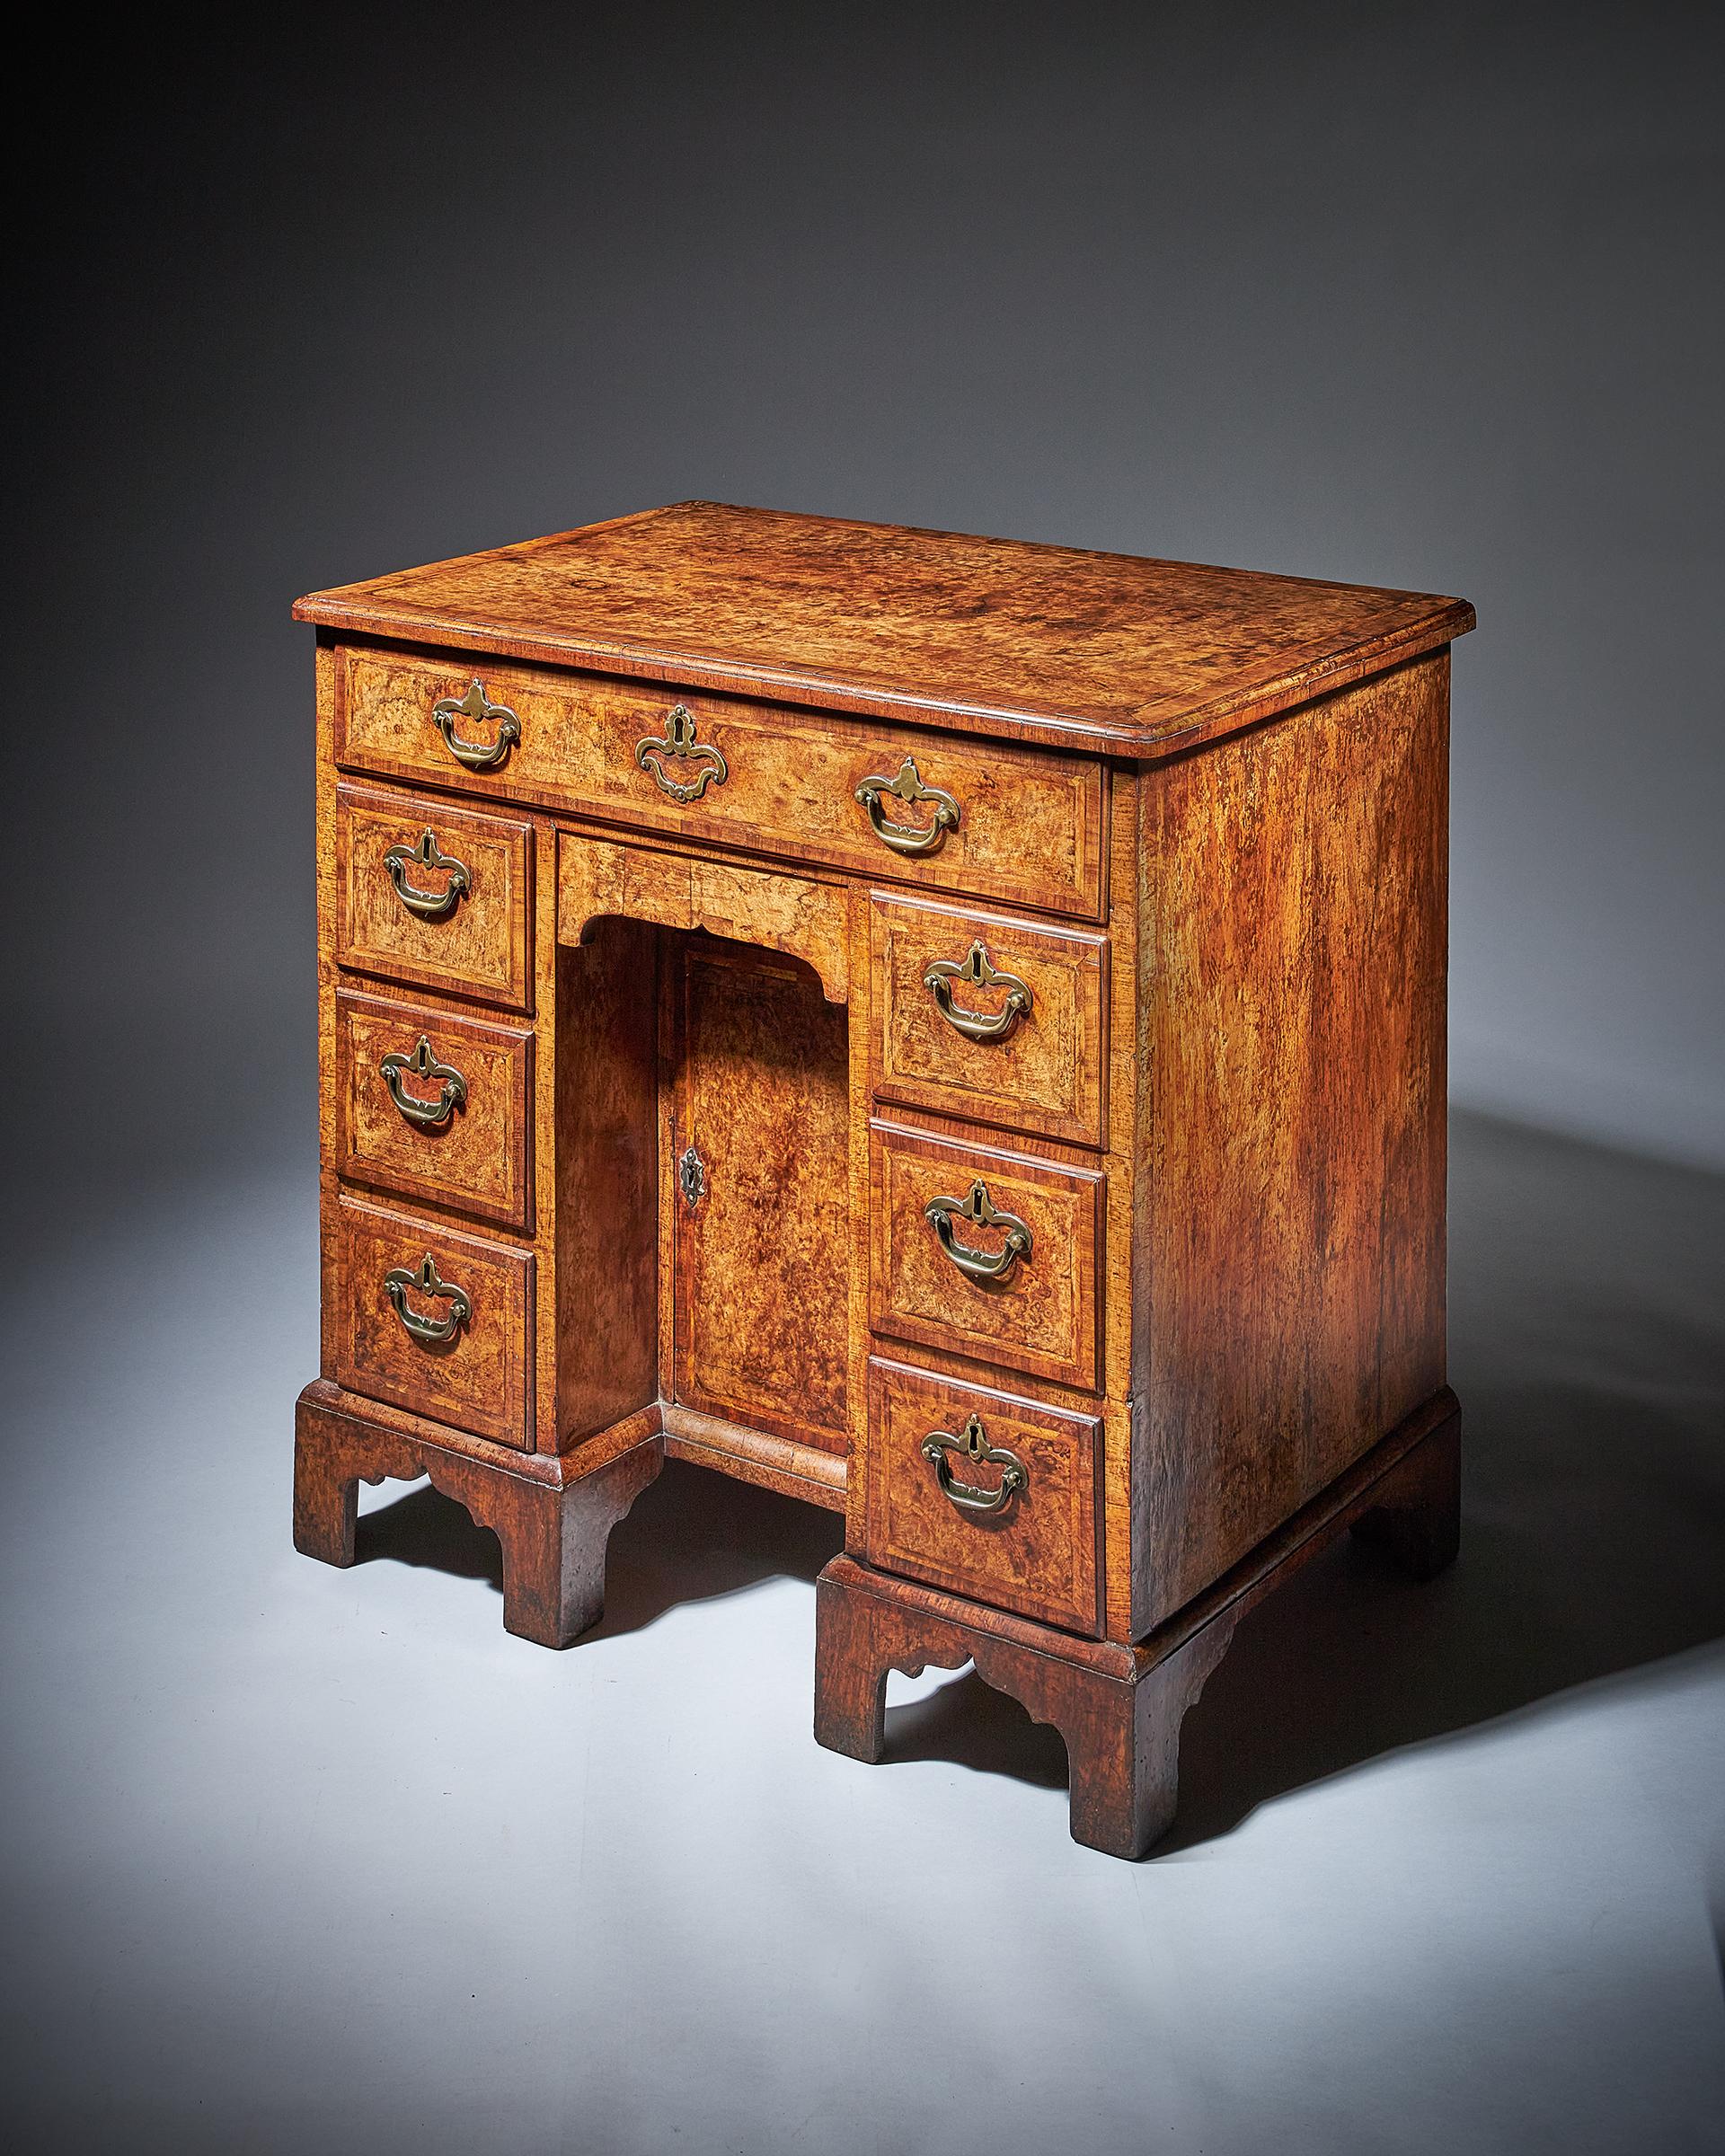 Rare Burr walnut George II 18th century kneehole desk / bachelor's chest, circa 1730-1740. England

The superb quarter veneered burr walnut top is bordered by a fine feather stringing, cross-banded and edged with cross-grain ovolo